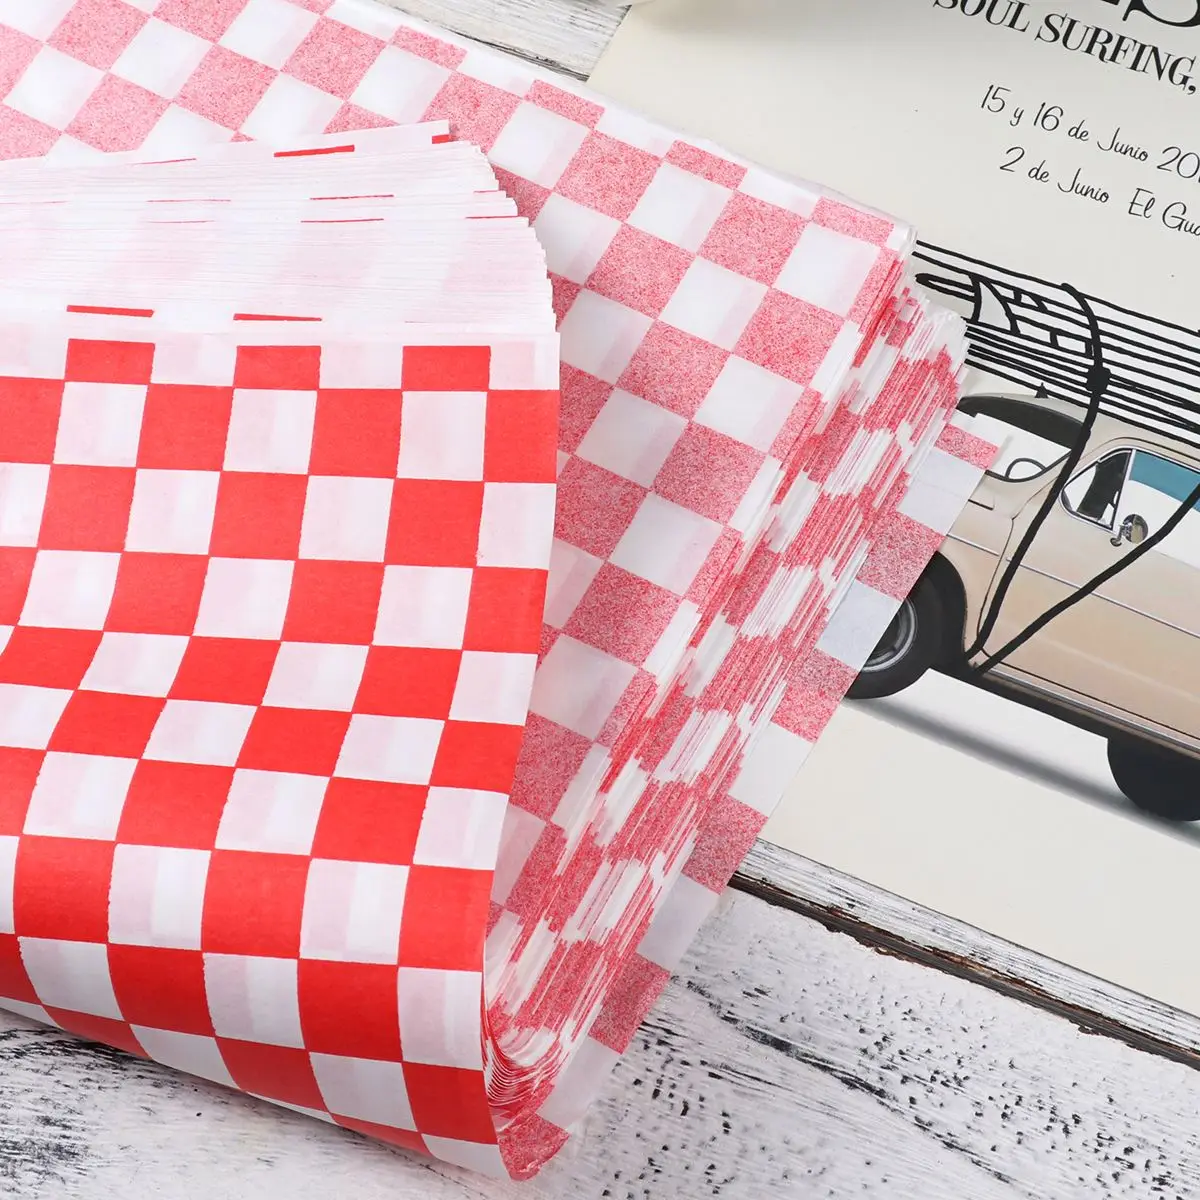 https://ae01.alicdn.com/kf/H9f4f5569a1e1486e9cf1e4bafaedac18x/100-Sheets-Food-Wrapping-Paper-Deli-Basket-Liner-Grease-Resistant-Sandwich-Packaging-Paper-Hamburger-Paper-Wrap.jpg